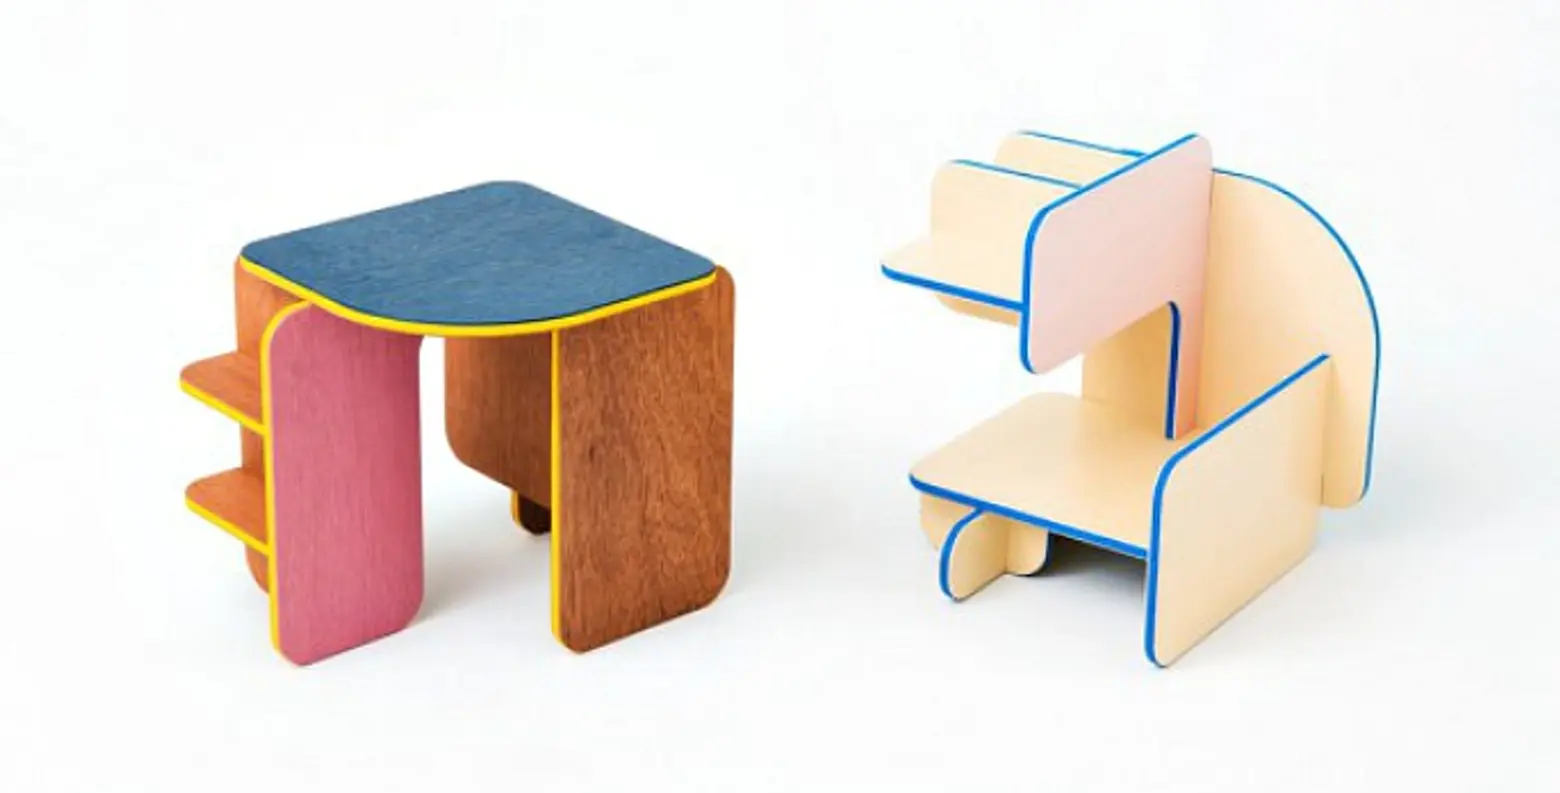 Torafu Architects’ Dice Furniture Goes from a Stool to a Shelf with Just One Roll